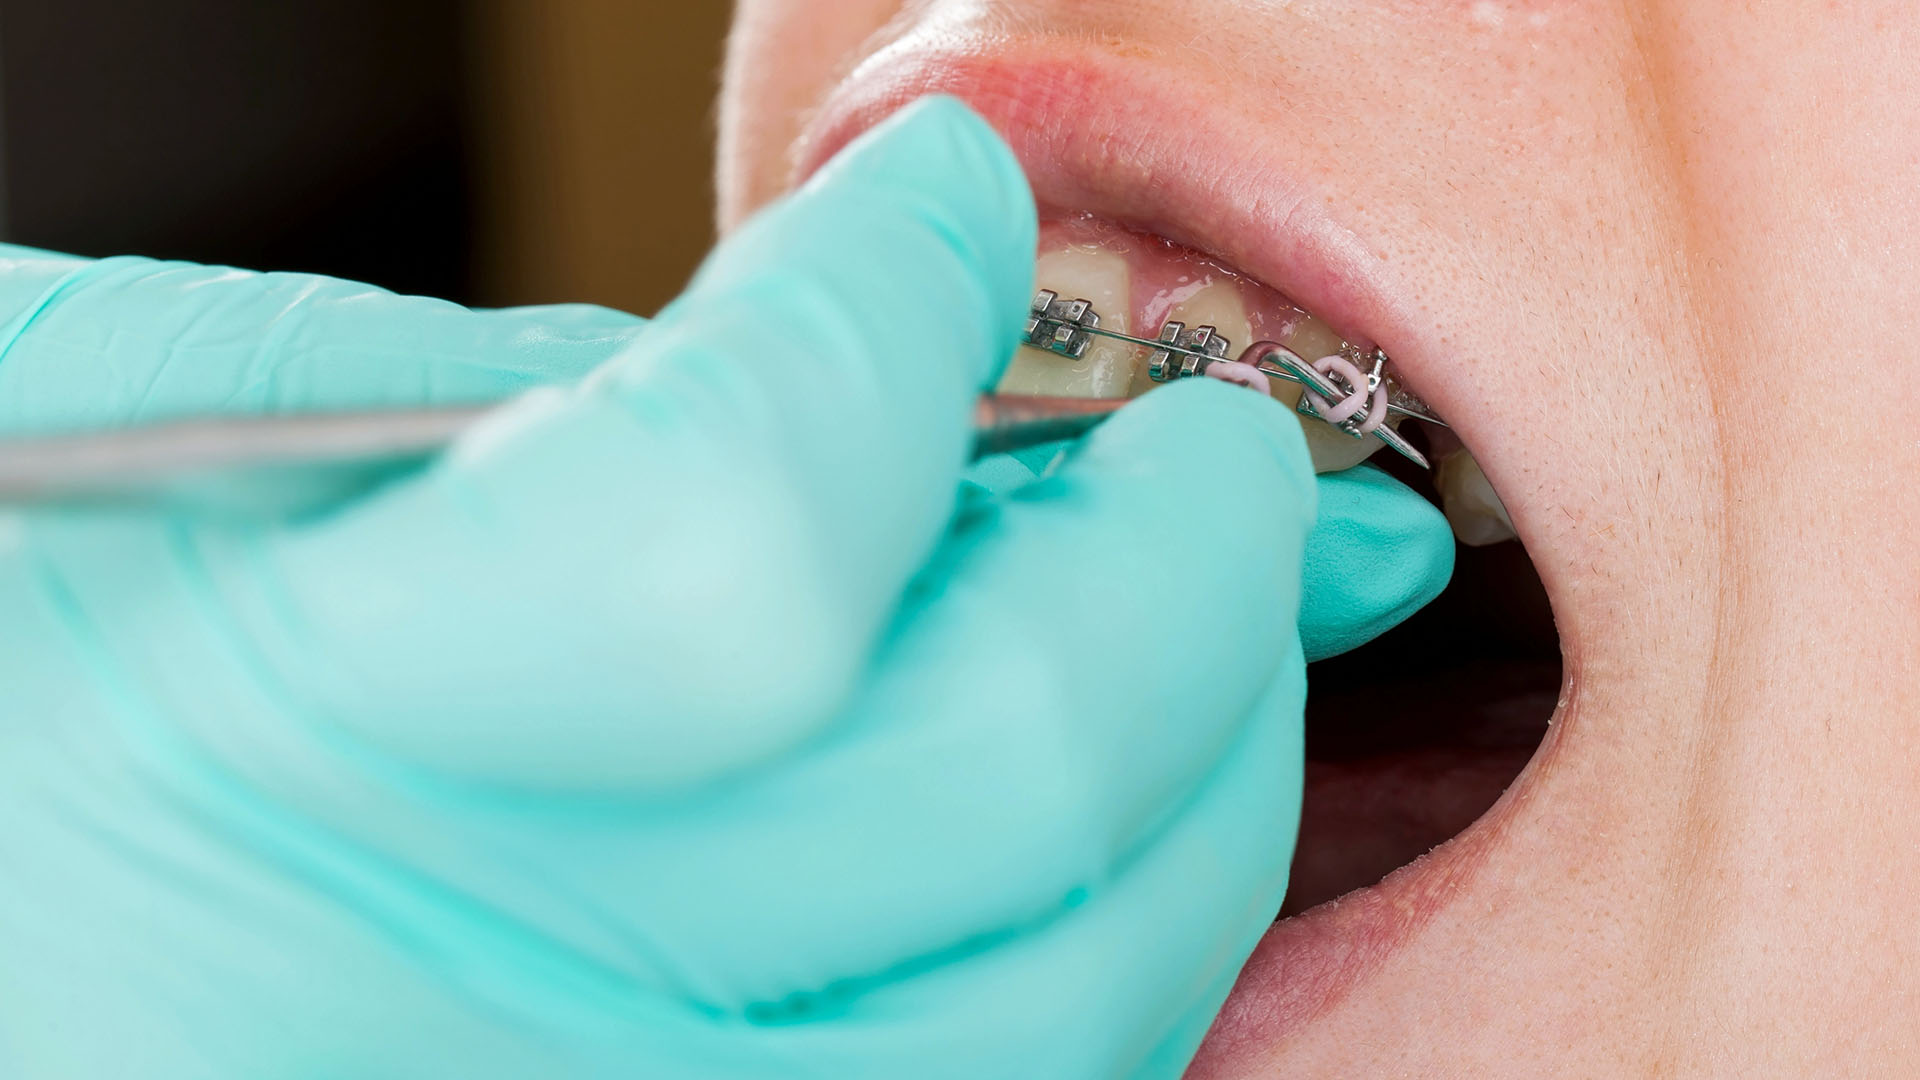 Children are stressed by anesthesia during dental care